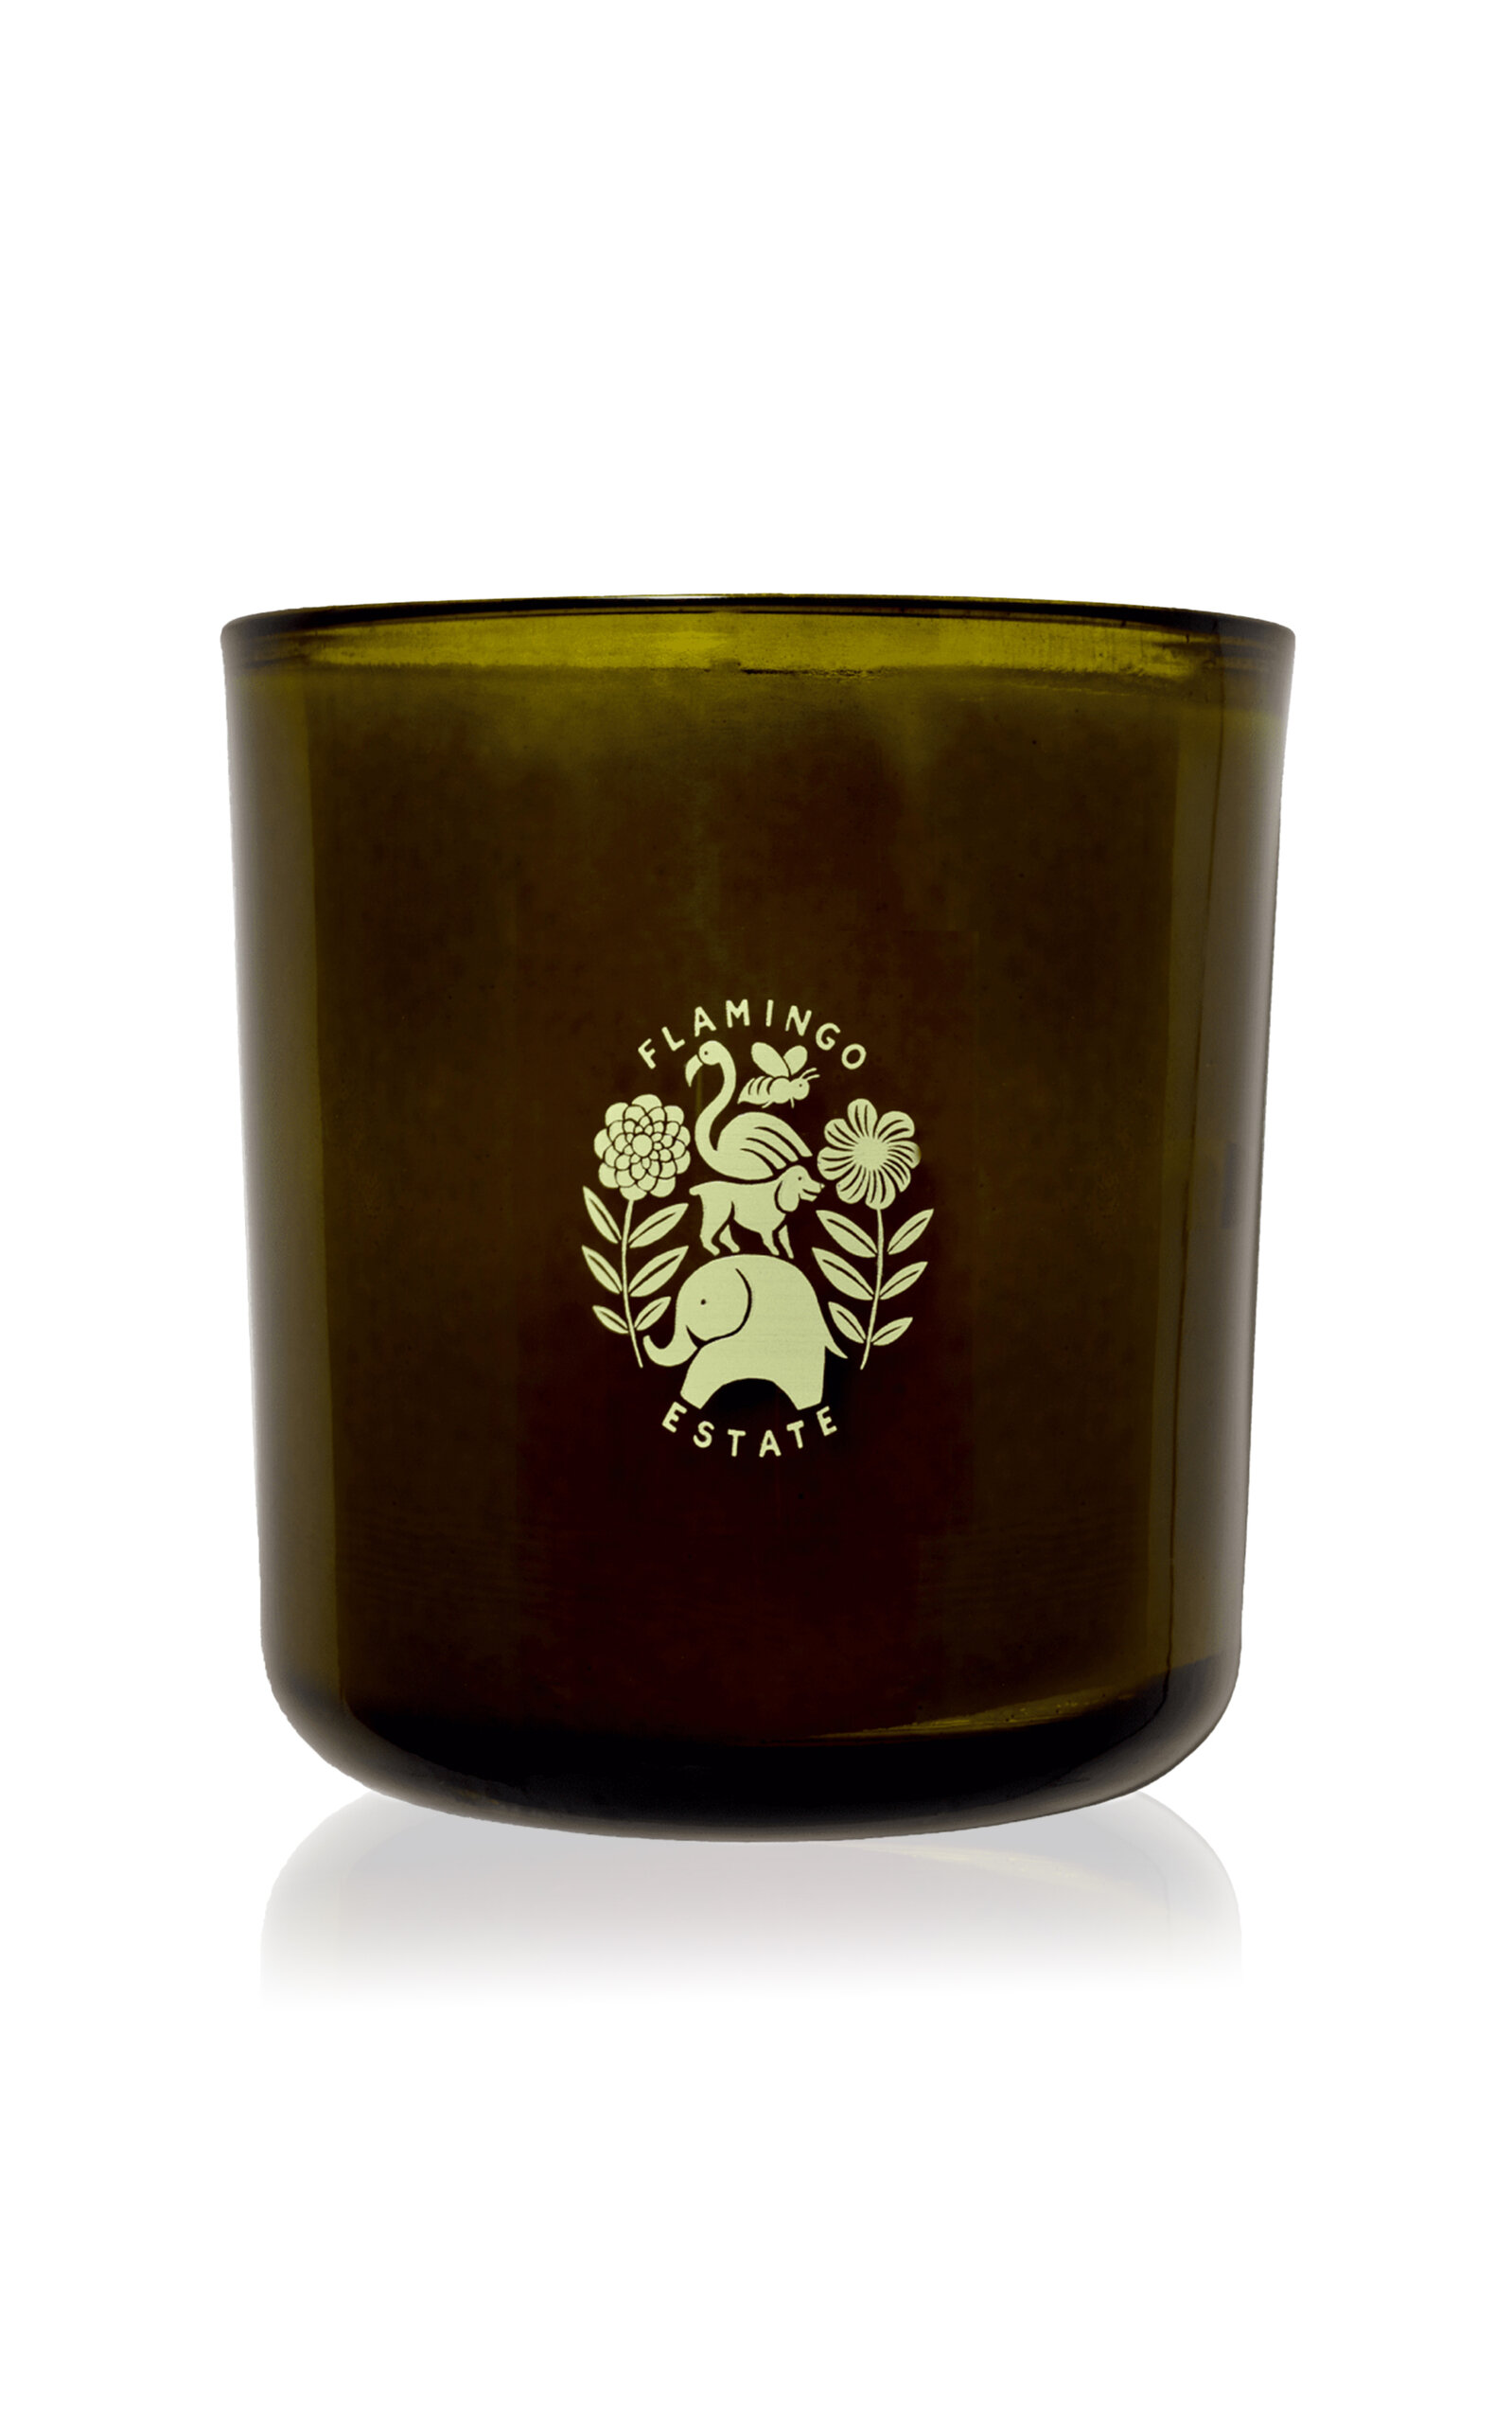 Flamingo Estate Climbing Tuscan Rosemary Candle In Green